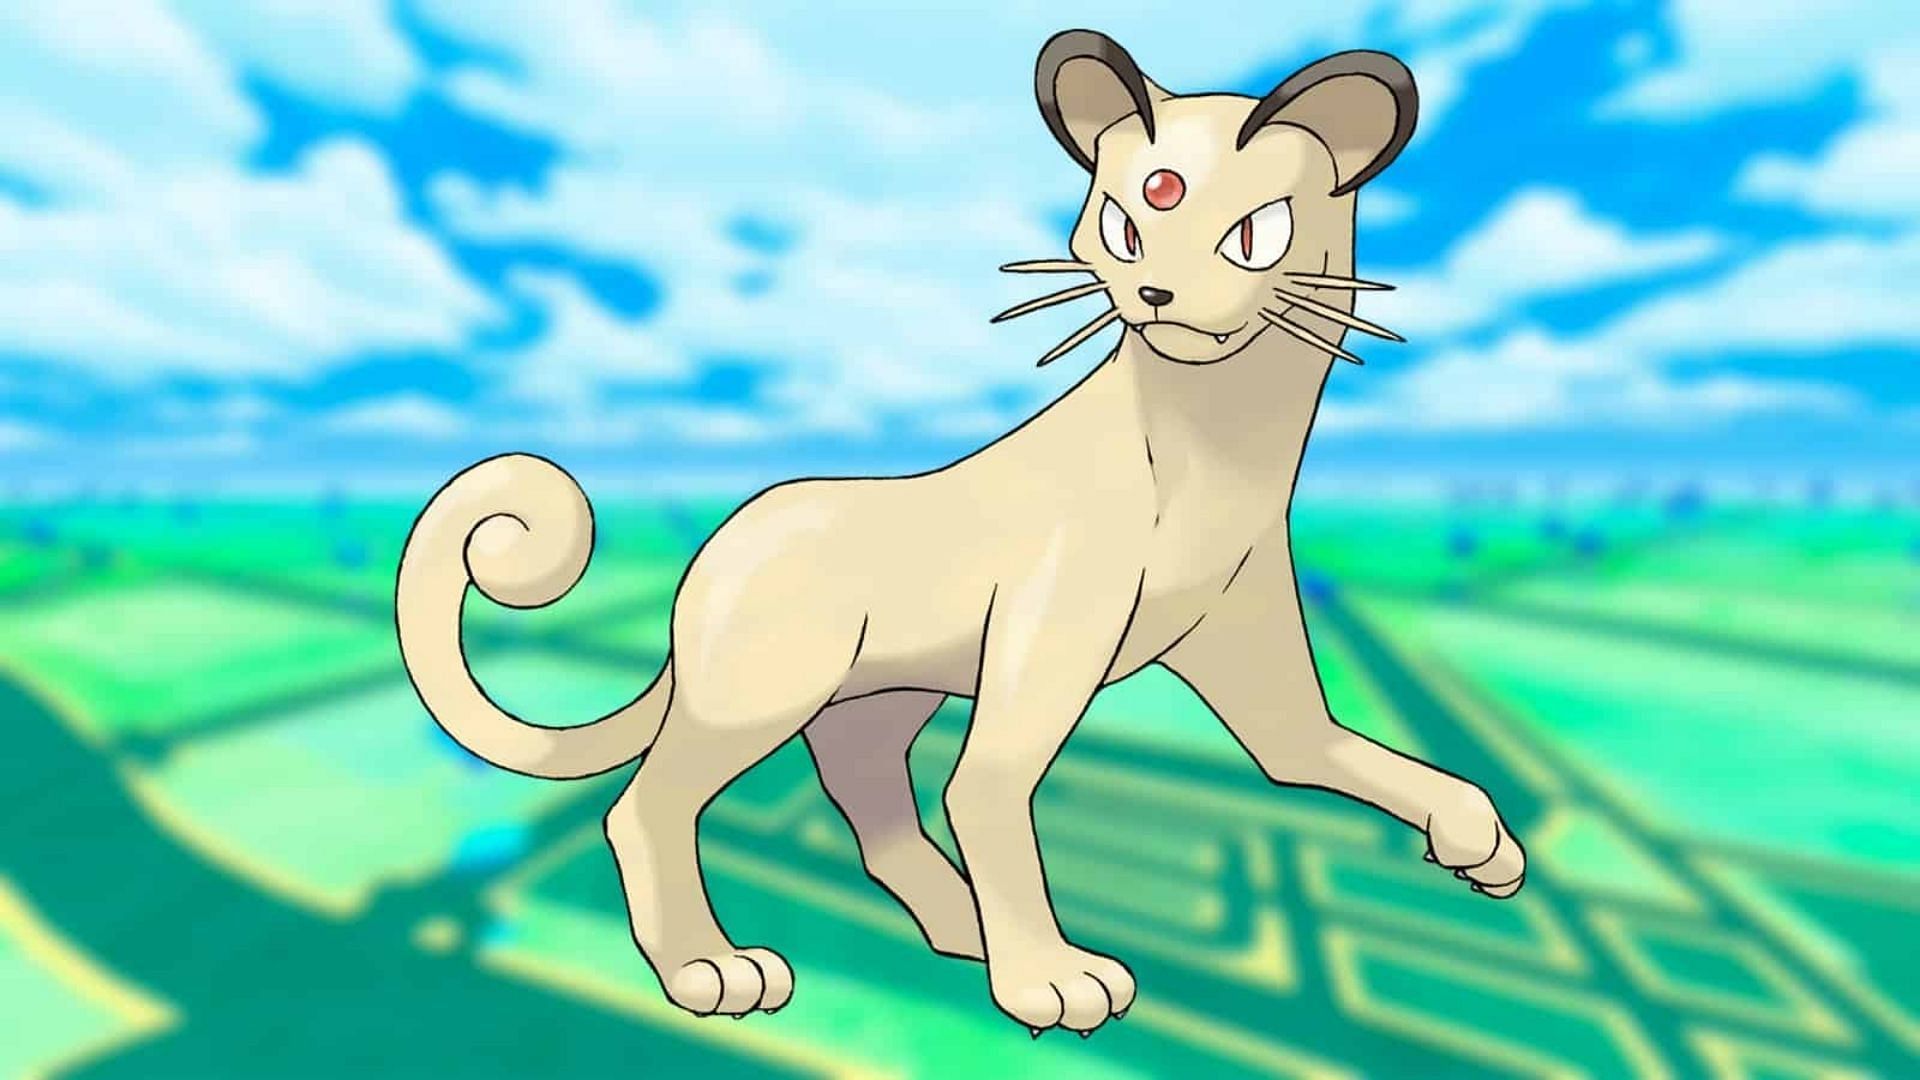 The best Persian moves are Scratch and Play Rough (Image via Niantic)